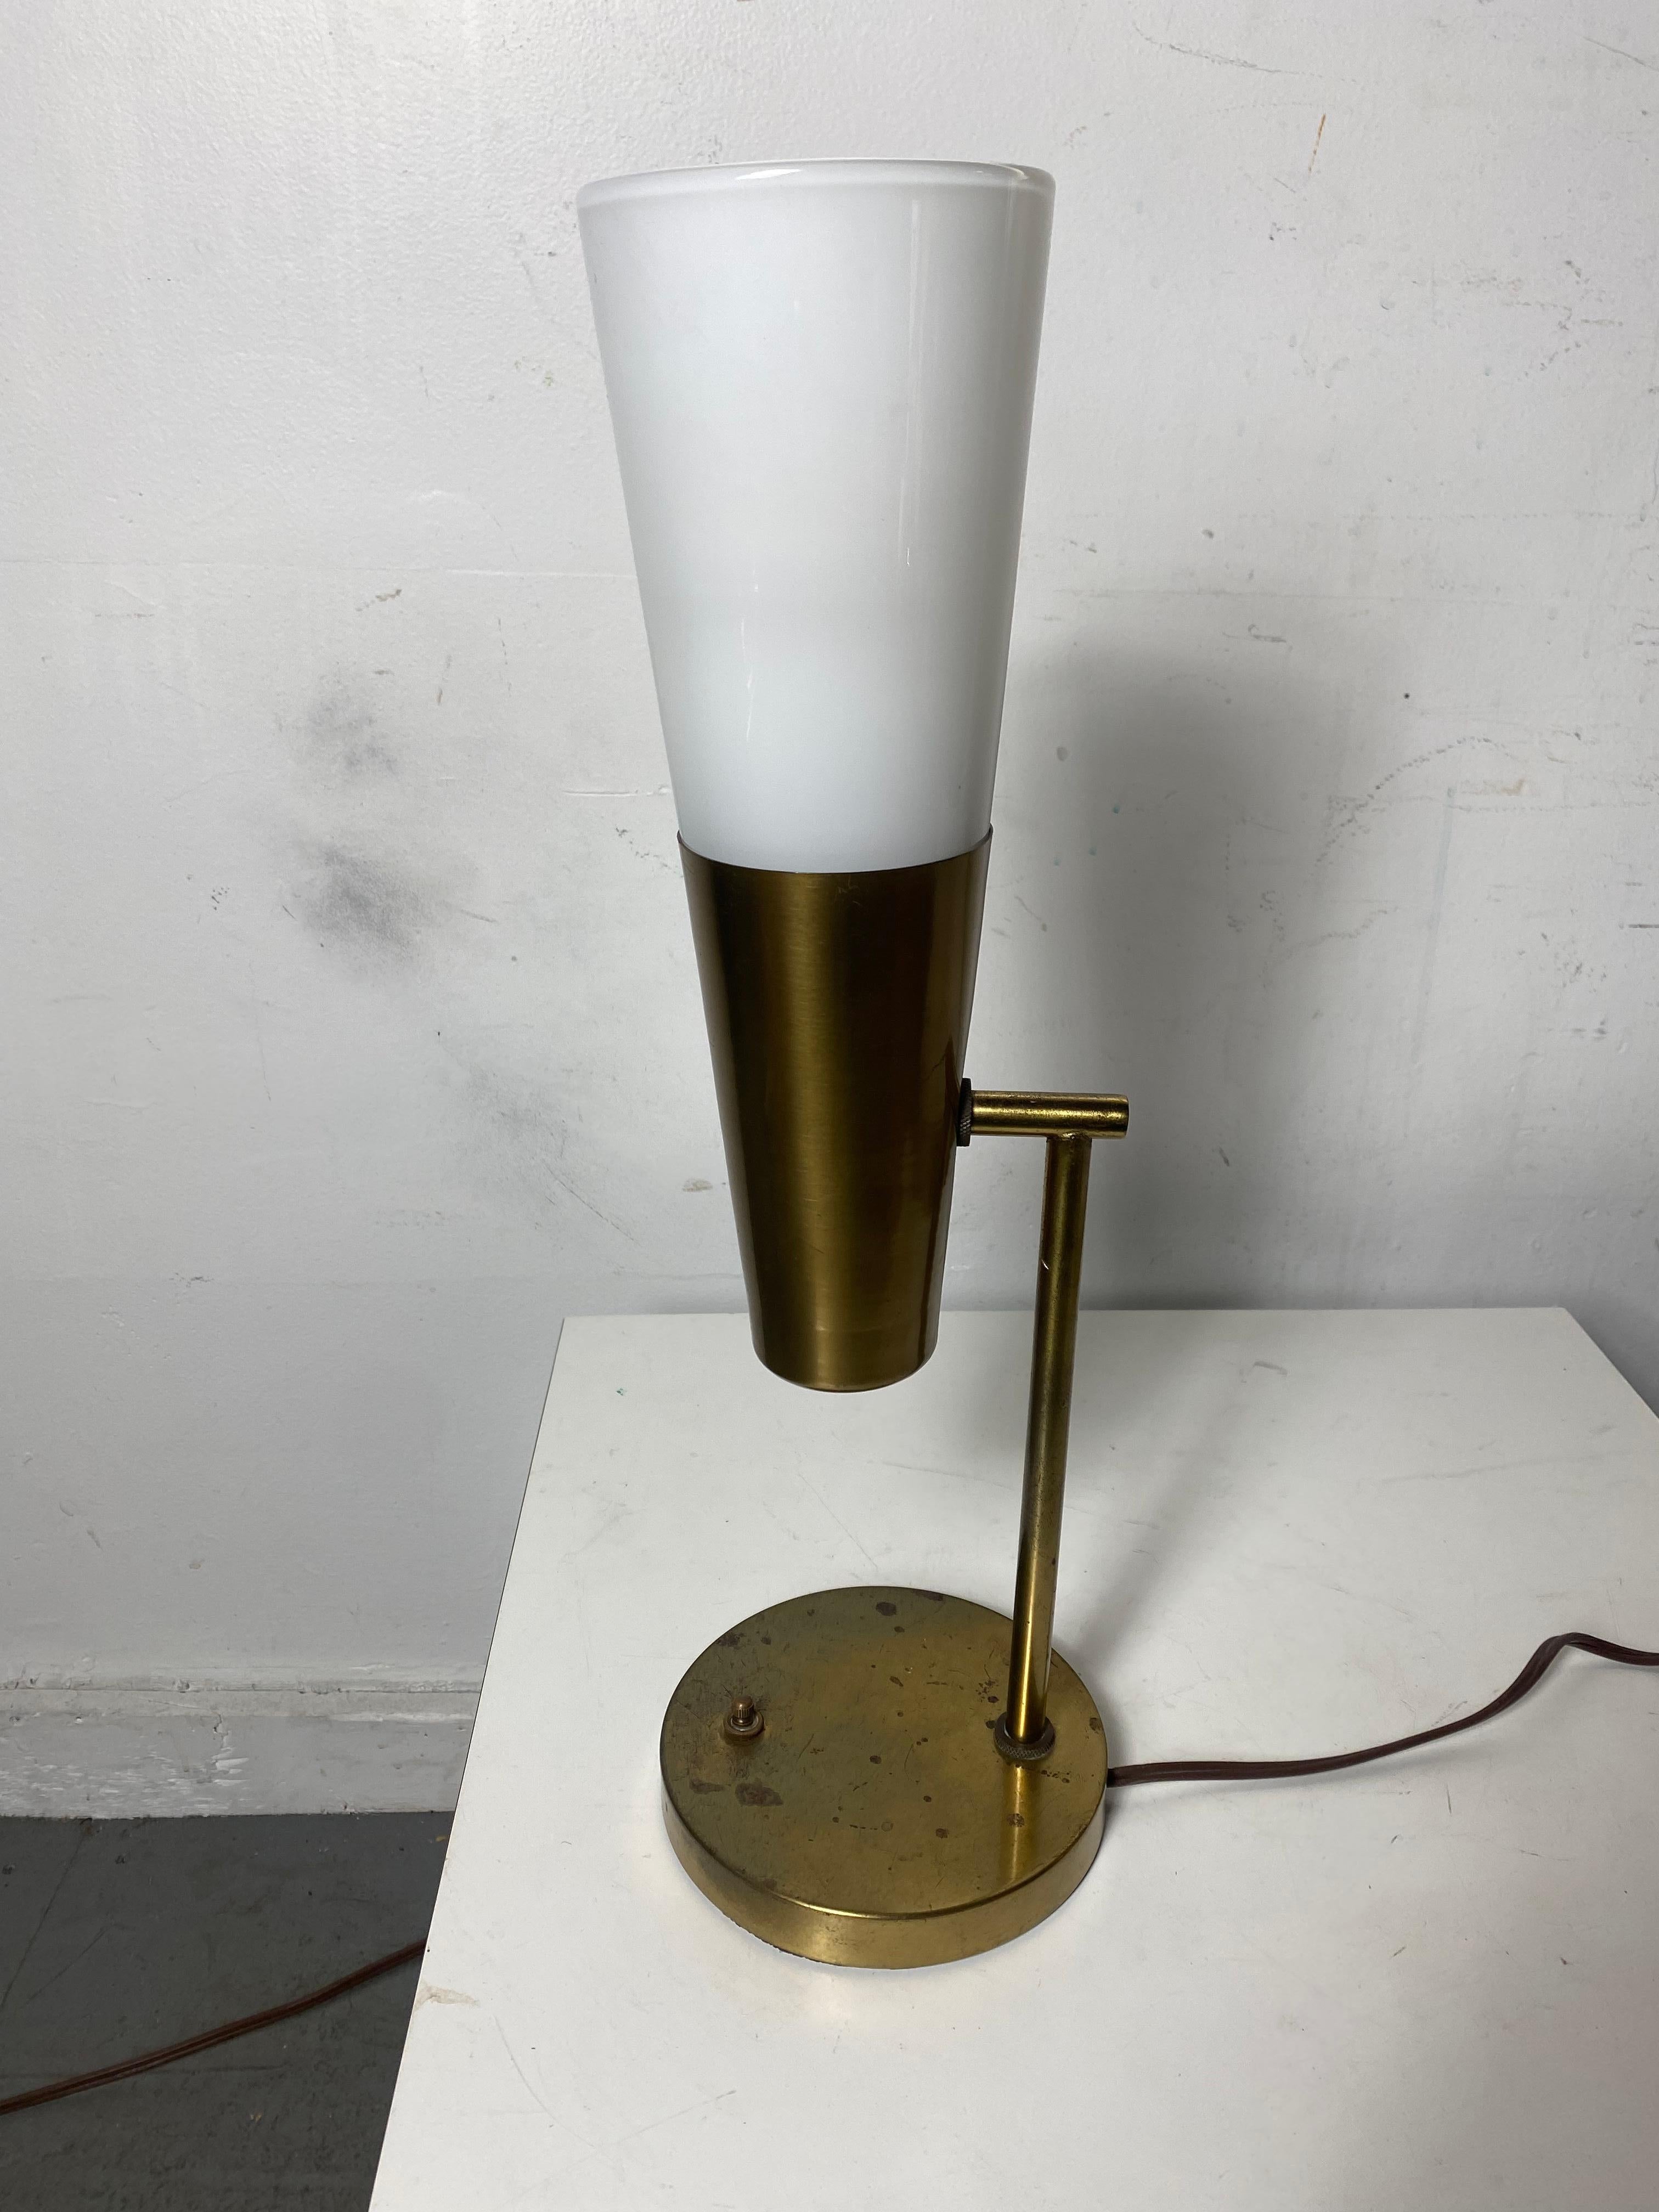 Rare Modernist Brass and Glass Lamp designed by Paul McCobb For Sale 4